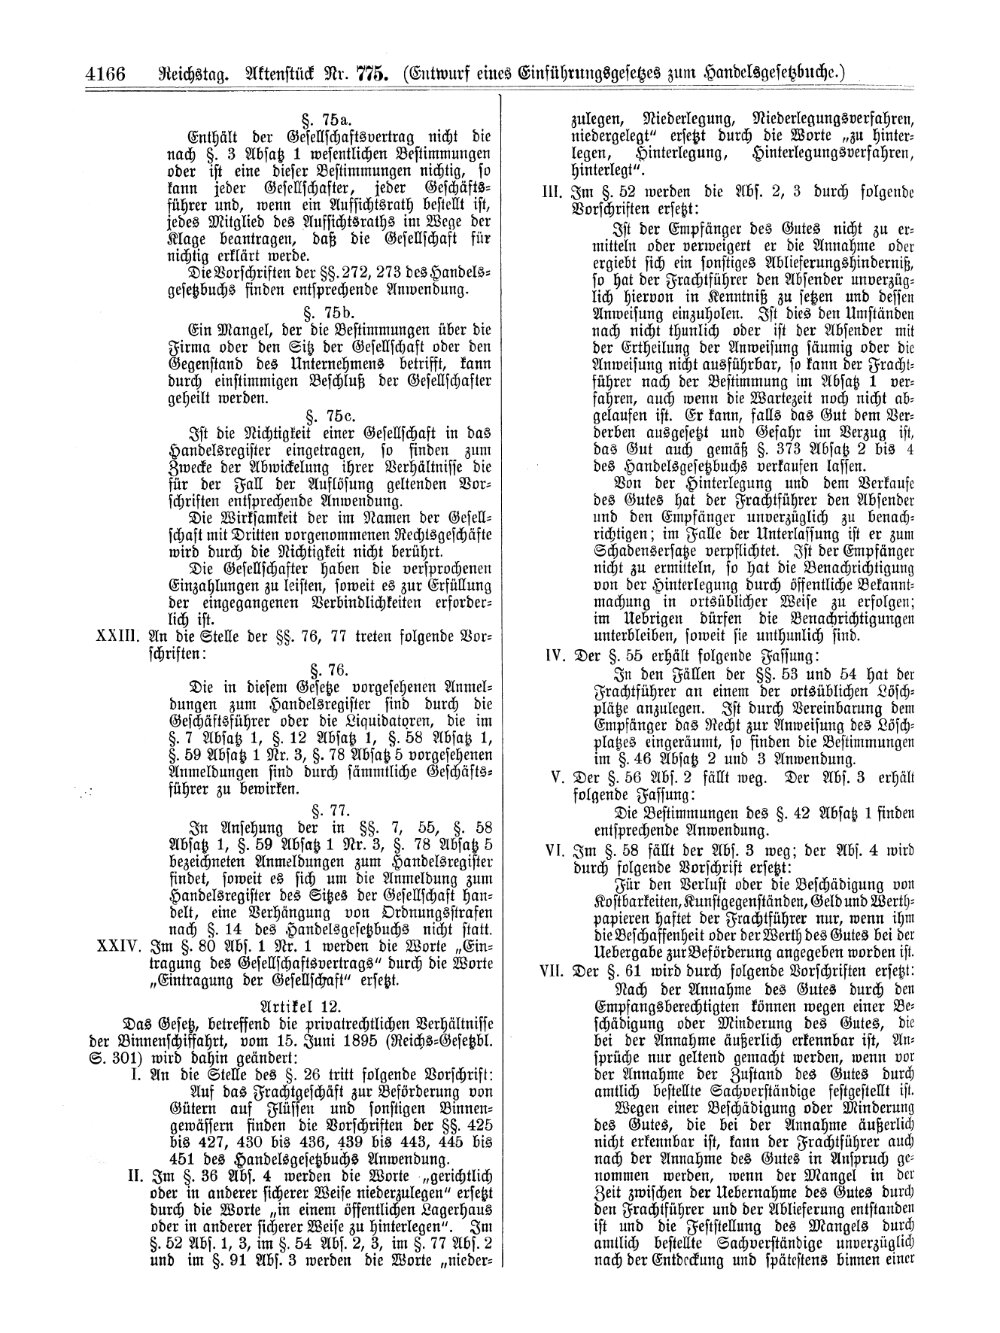 Scan of page 4166